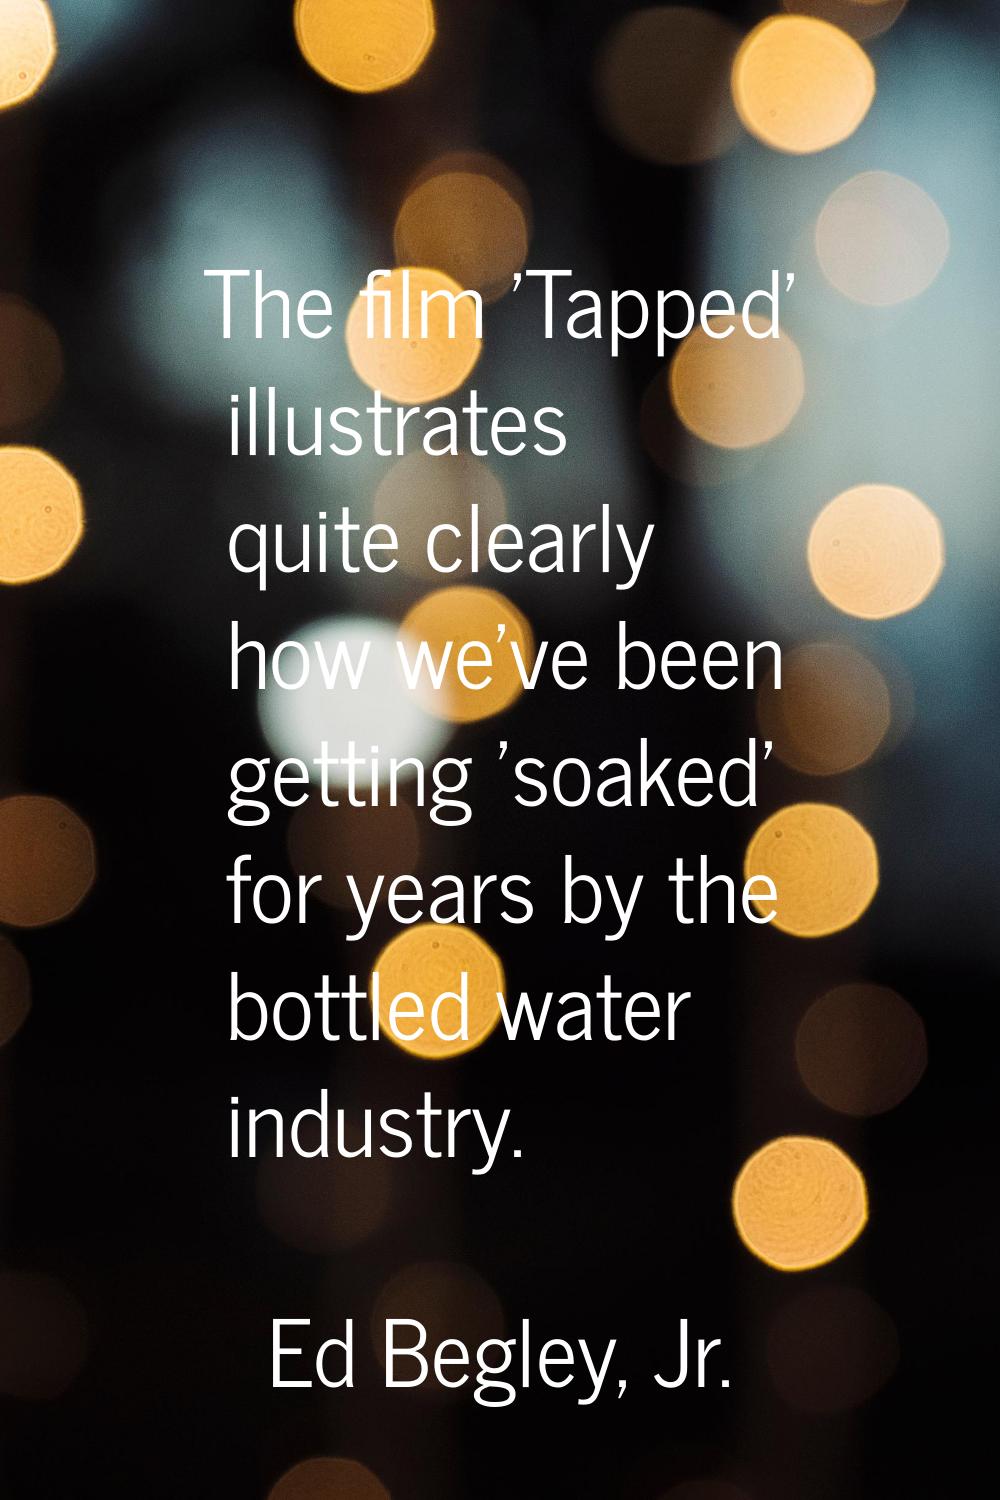 The film 'Tapped' illustrates quite clearly how we've been getting 'soaked' for years by the bottle